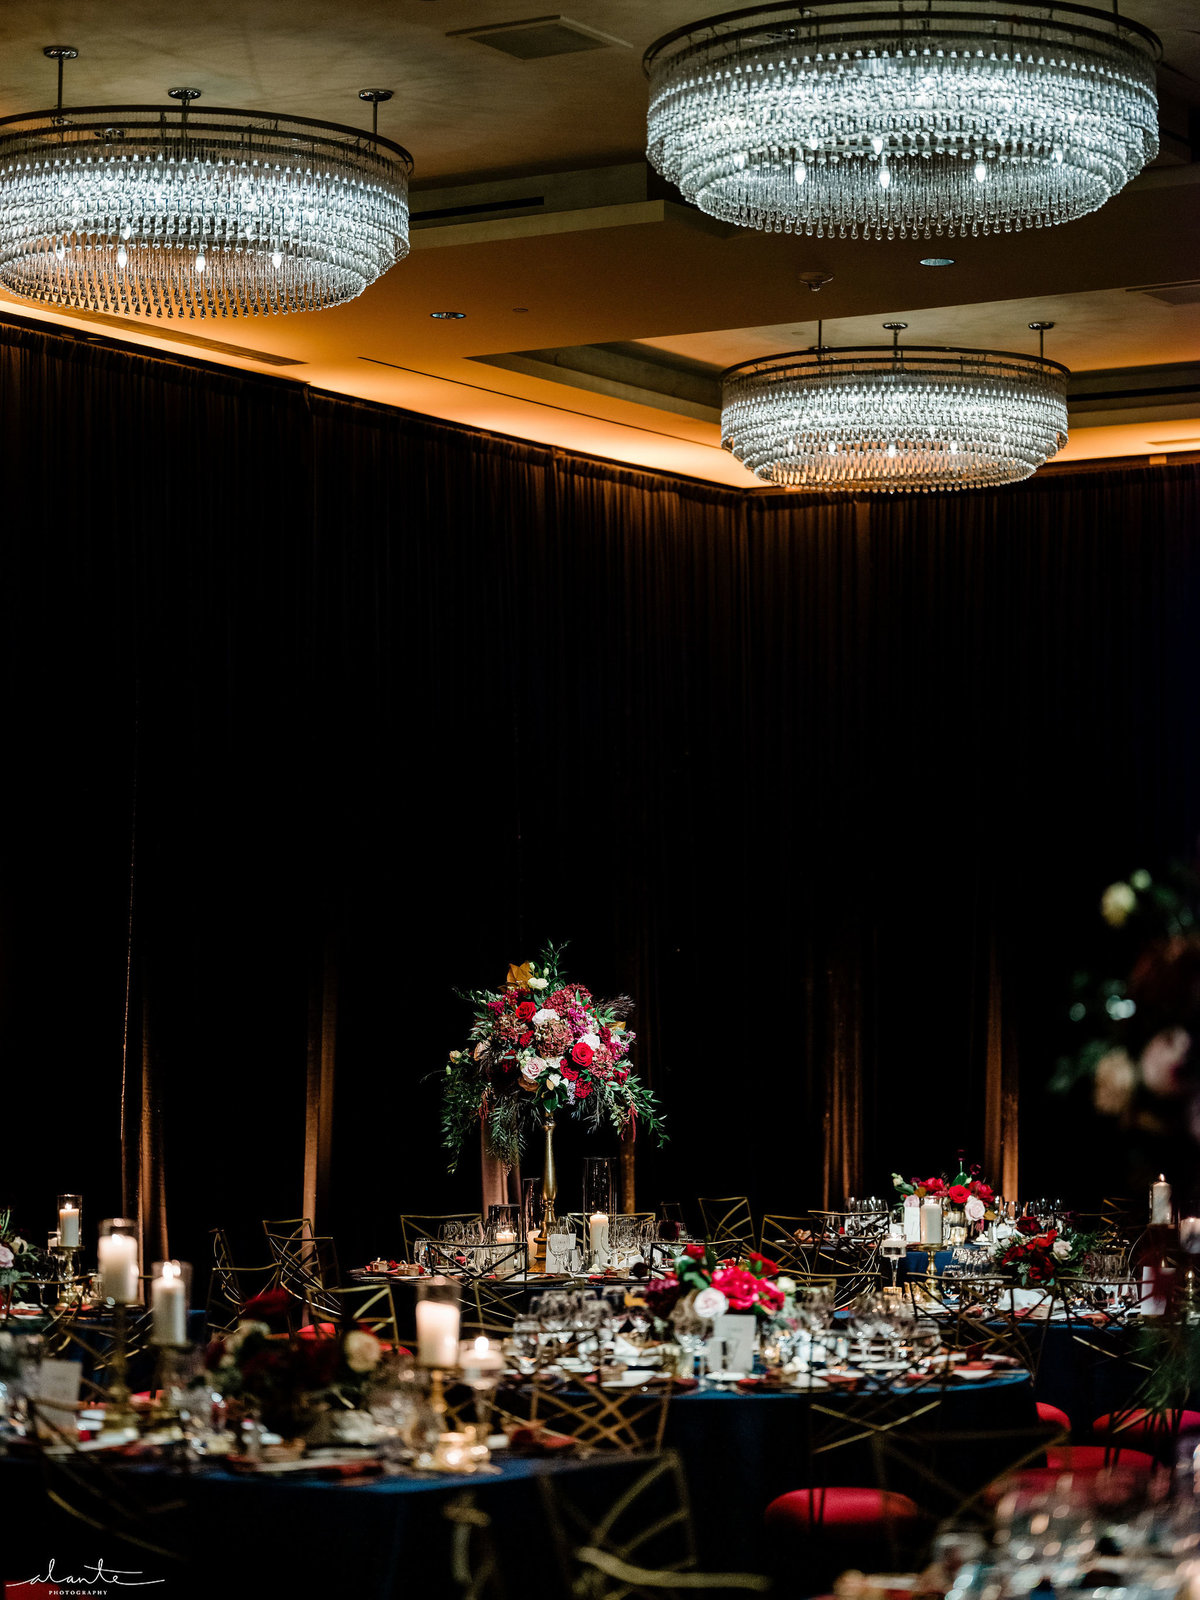 tall centerpiece of red and blush flowers in ballroom with navy blue draping, blue linens, and red seat Chameleon chairs